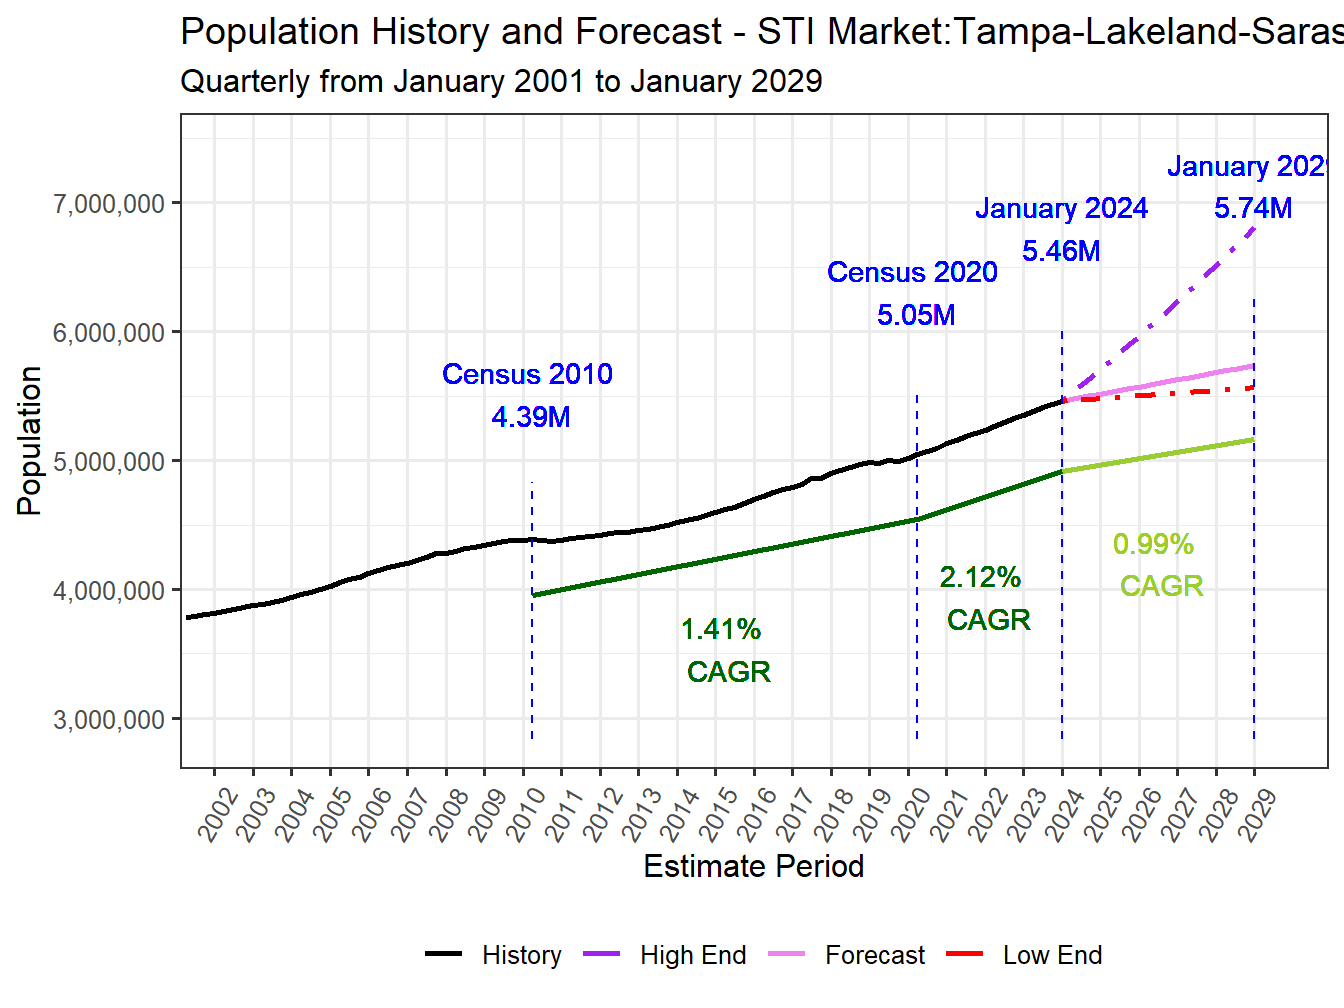 Population Long Trend and Forecast